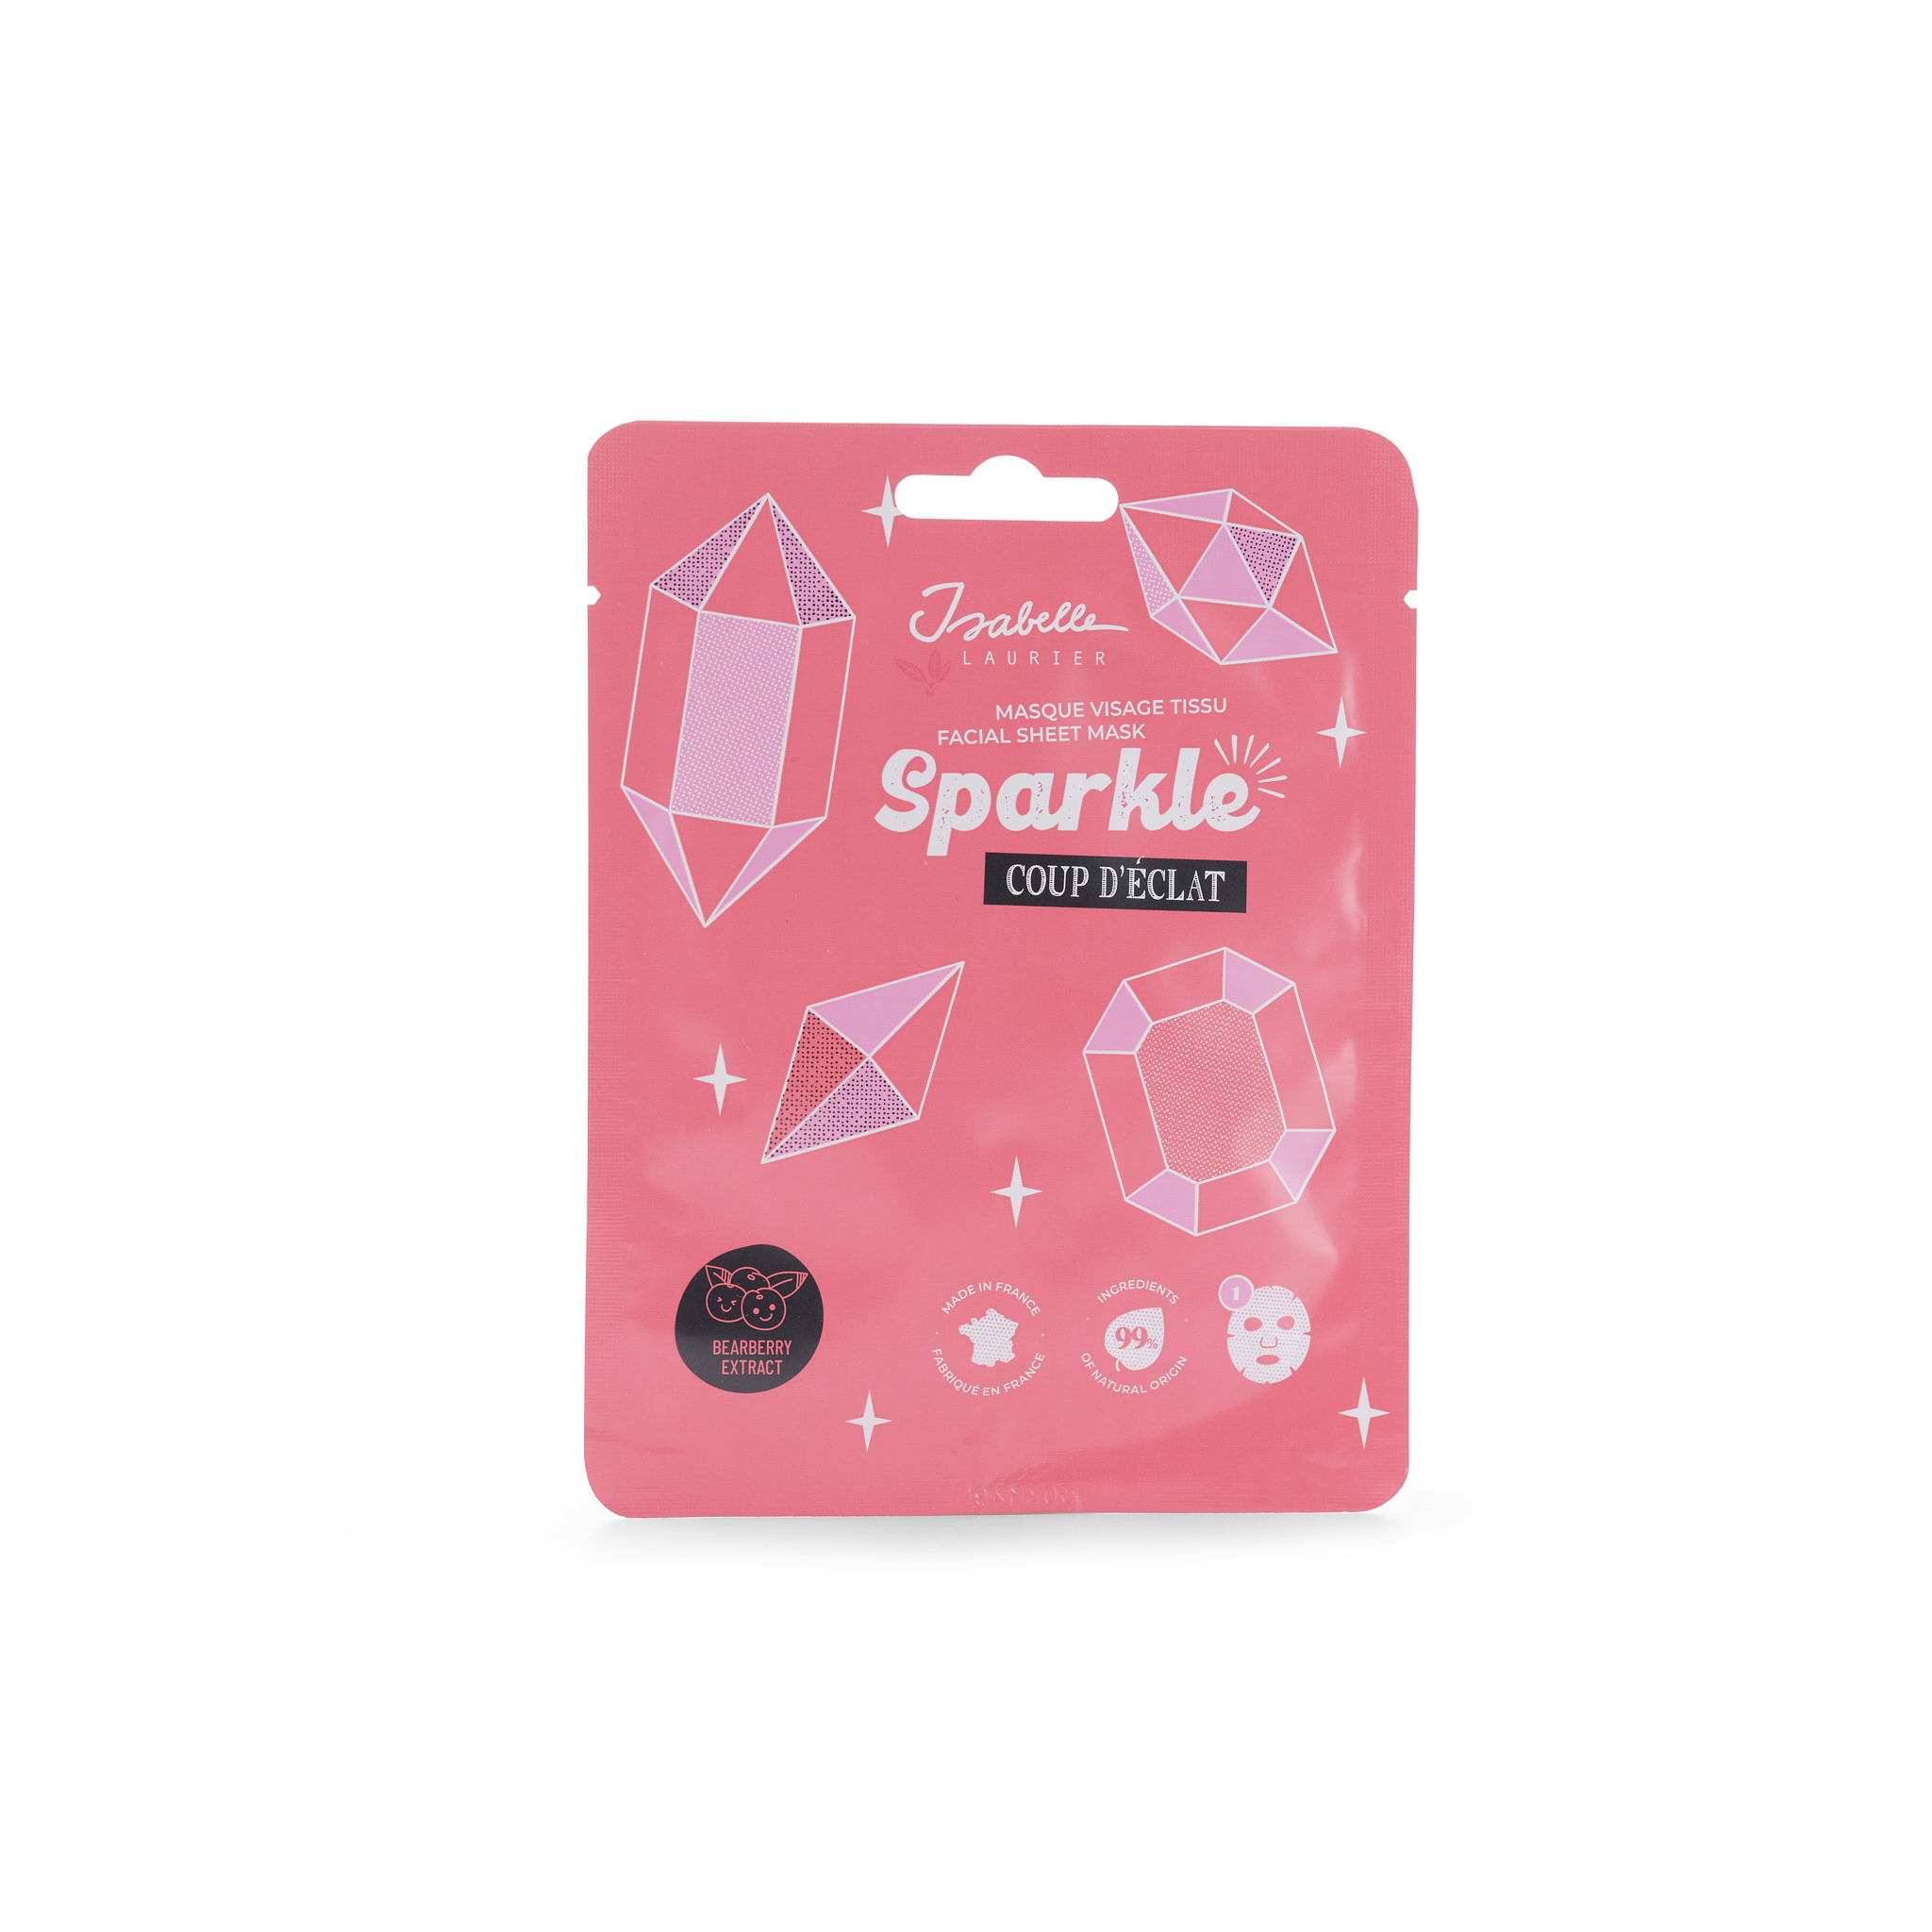 NEW! Facial sheet mask Sparkle – Bearberry